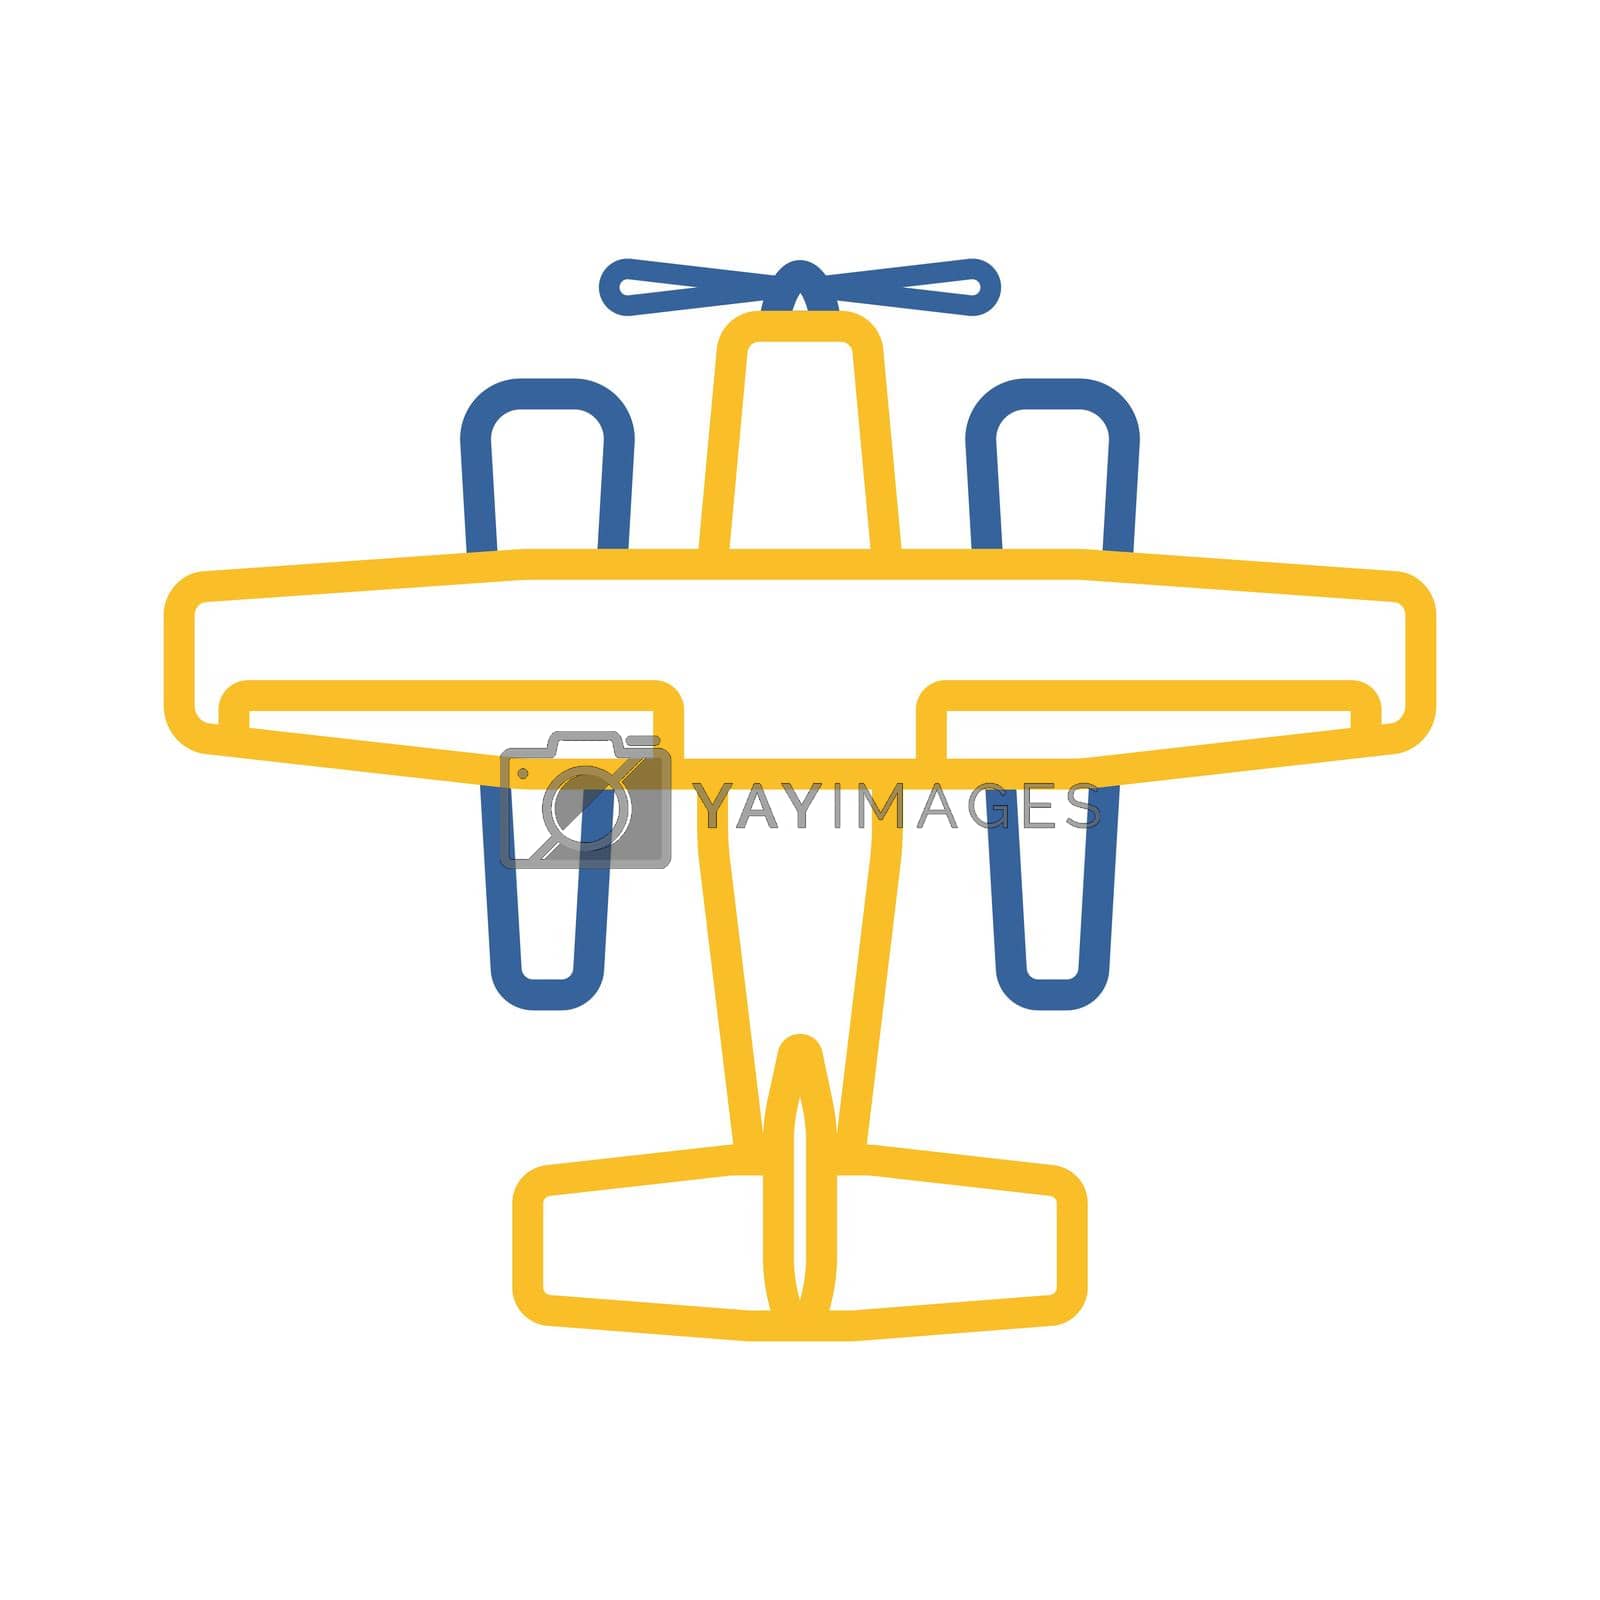 Small amphibian seaplane, plane flat vector icon. Graph symbol for travel and tourism web site and apps design, logo, app, UI